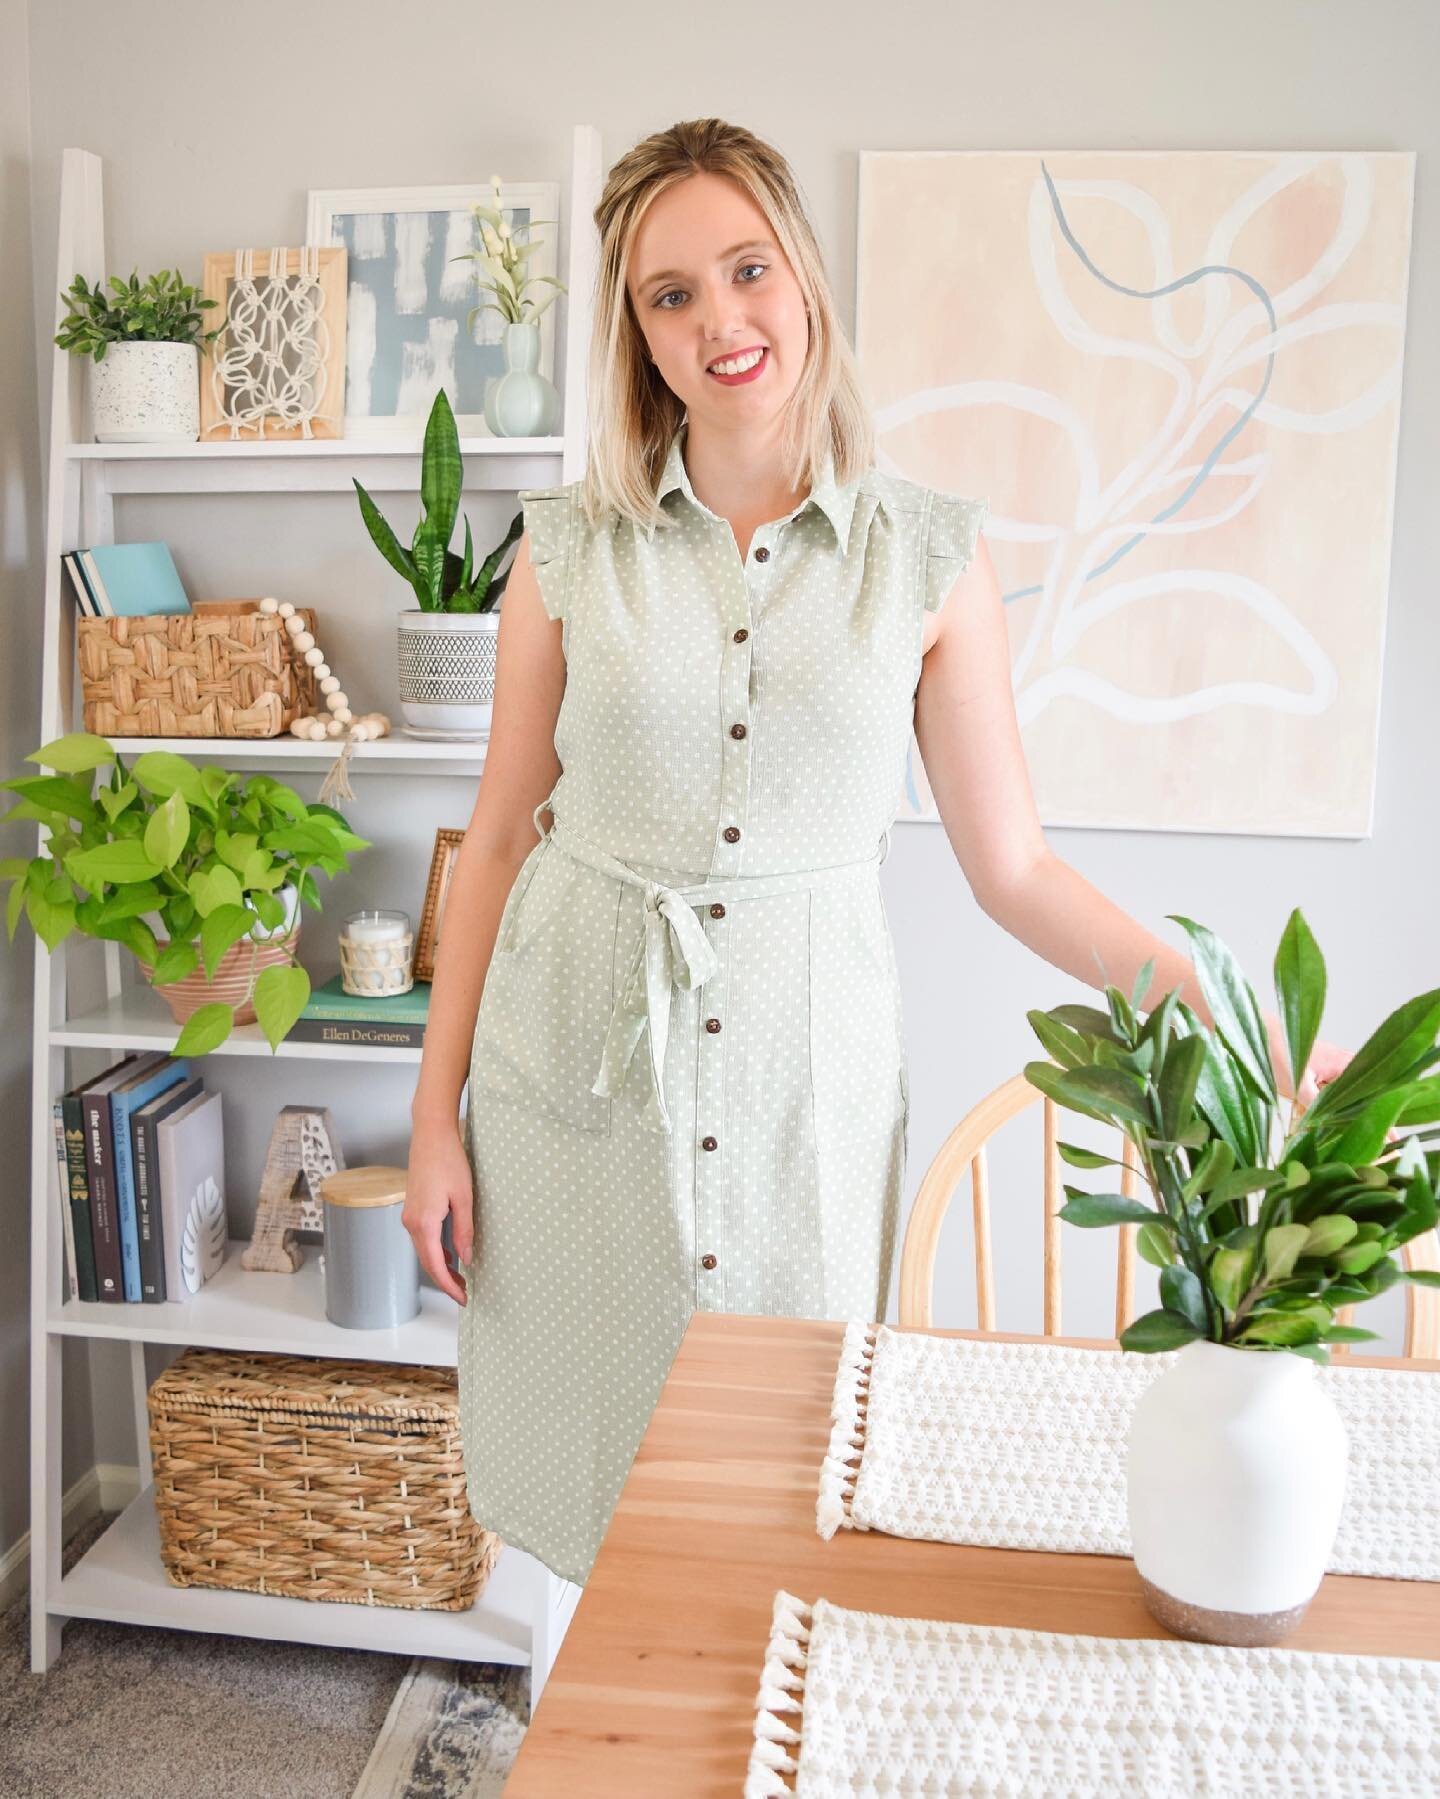 Let's talk shelf styling! At least, that's what I'm talking about in my stories today.

Shelf styling is definitely not one of my strong suits, mostly because the shelf you see here is the first shelf I've ever styled.

After living with it for a yea